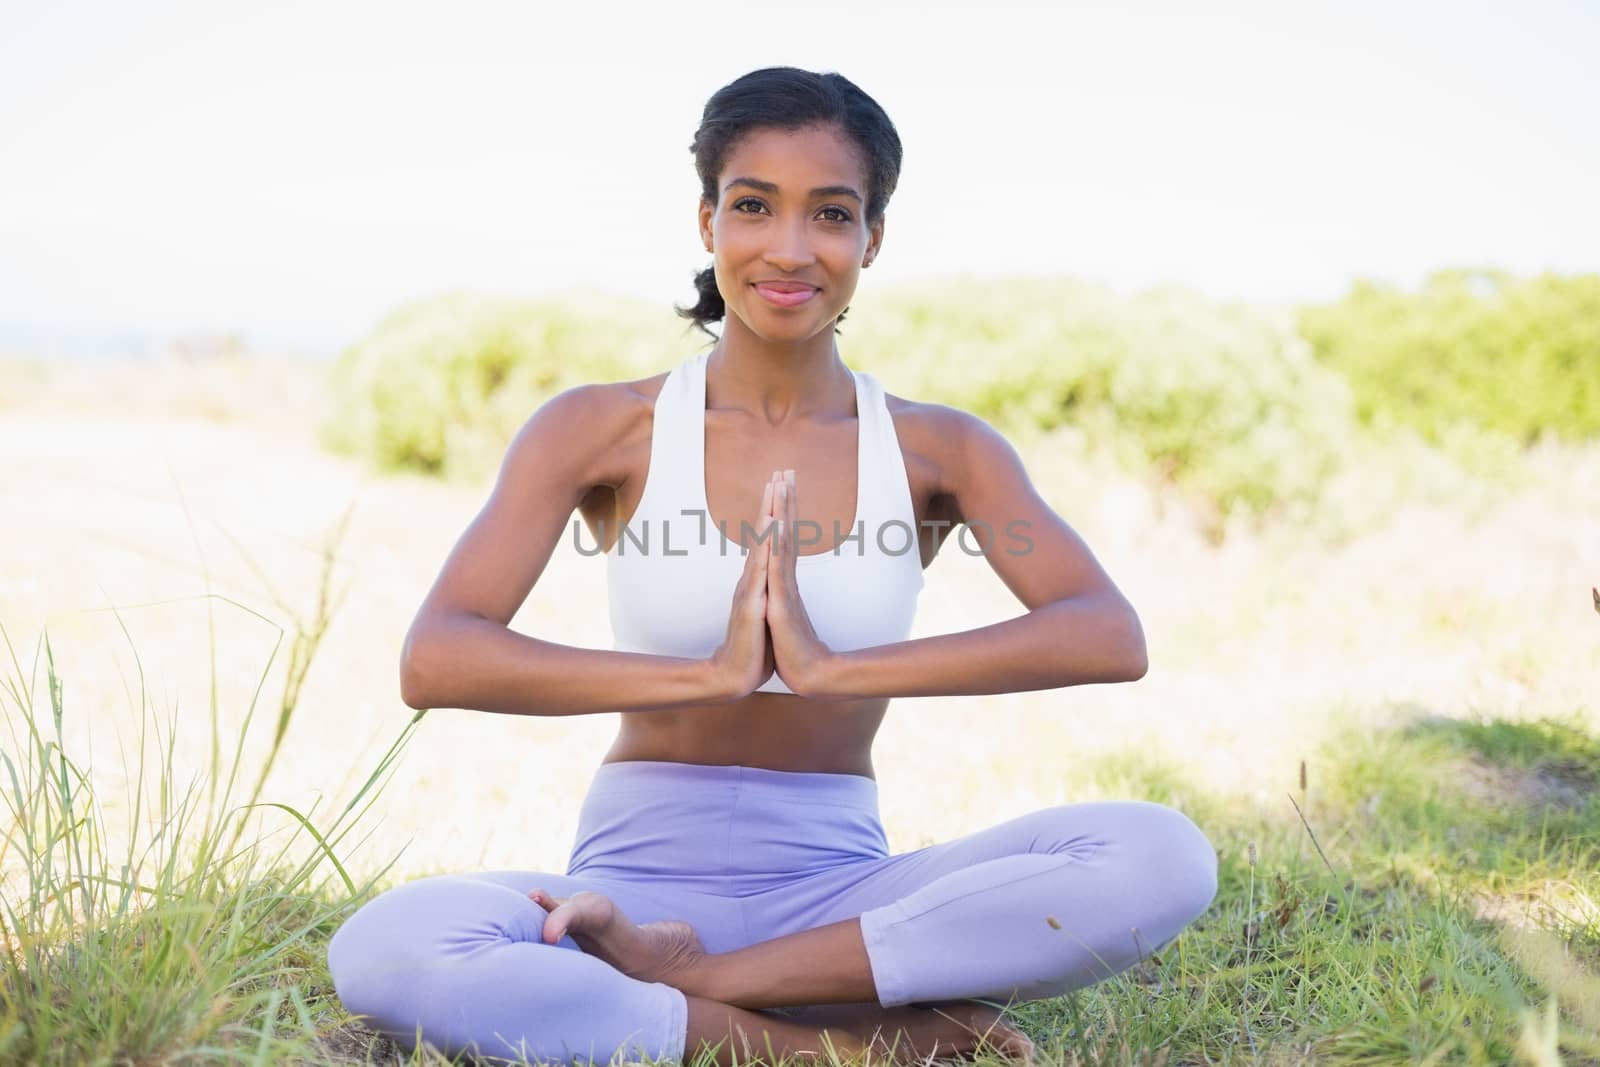 Fit woman sitting on grass in lotus pose smiling at camera on a sunny day in the countryside